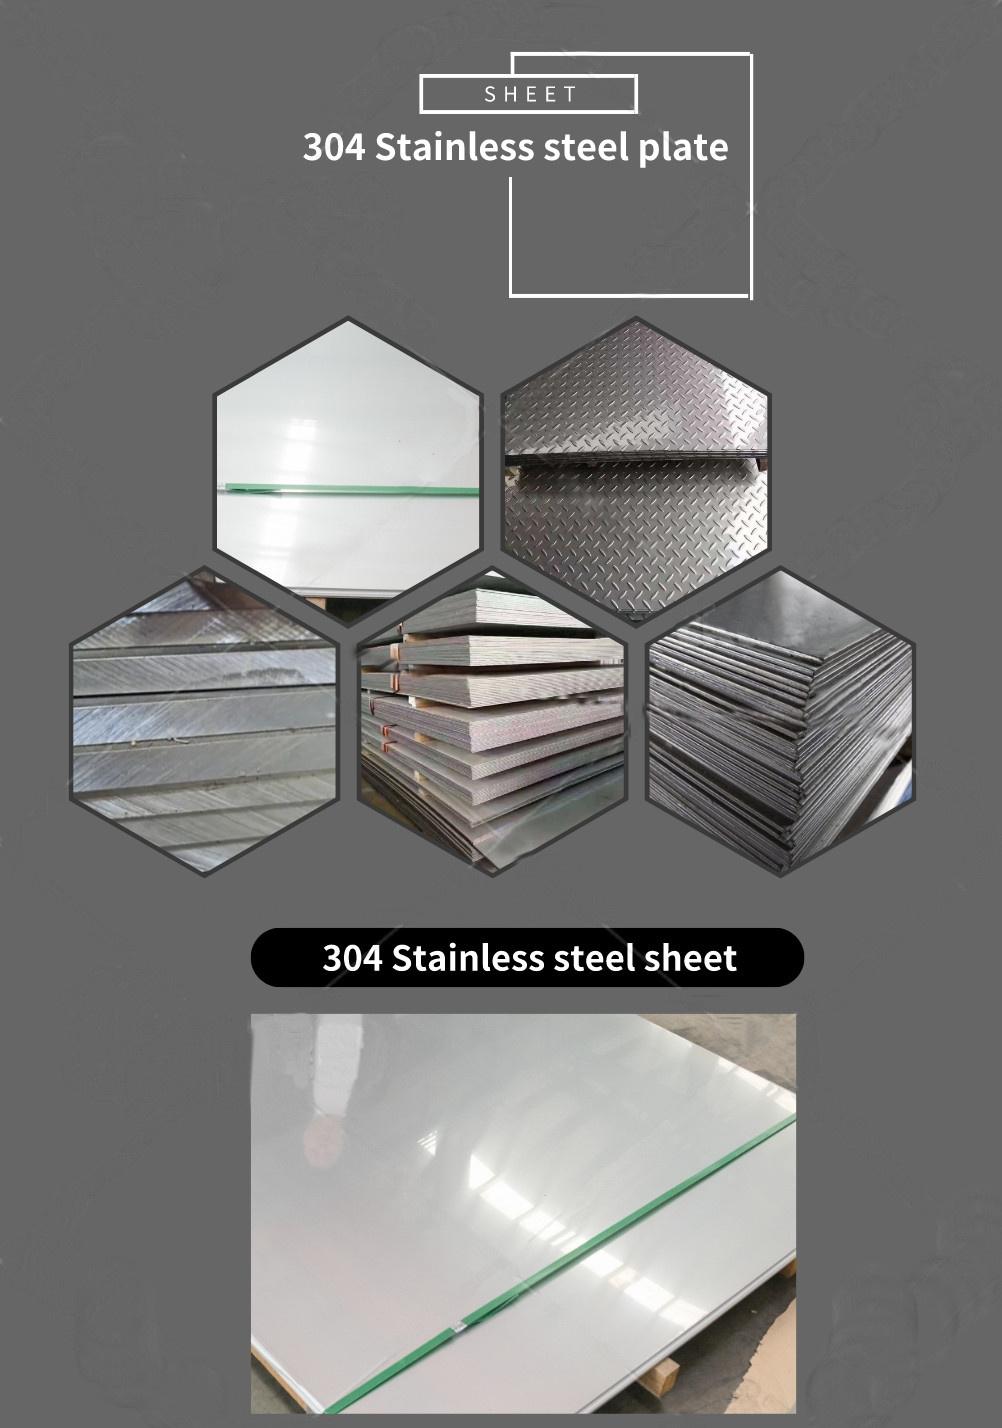 ASTM/GB/JIS 202 316 Hot Rolled Stainless Steel Plate for Boat Board